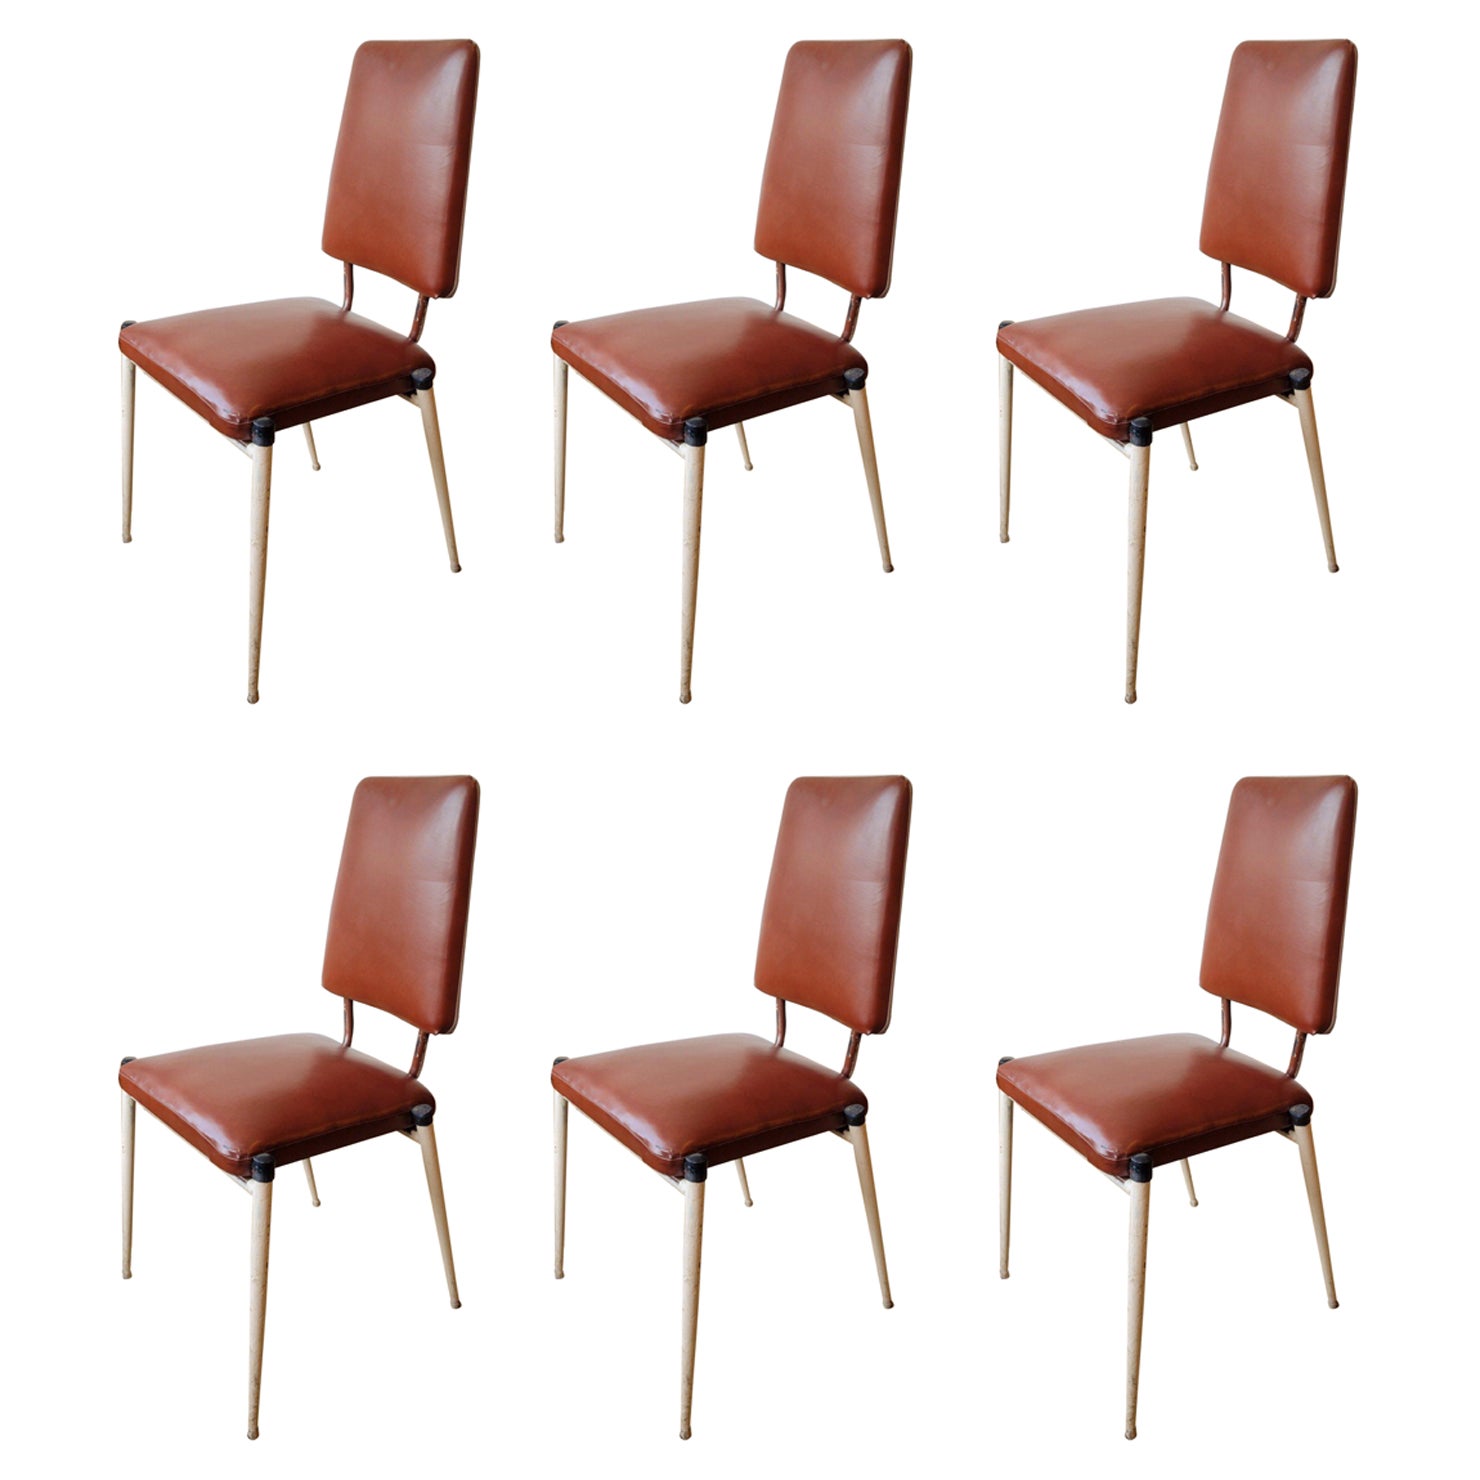 Mid-Century Modern Brazilian Brown and Gray Chairs, Set of 6